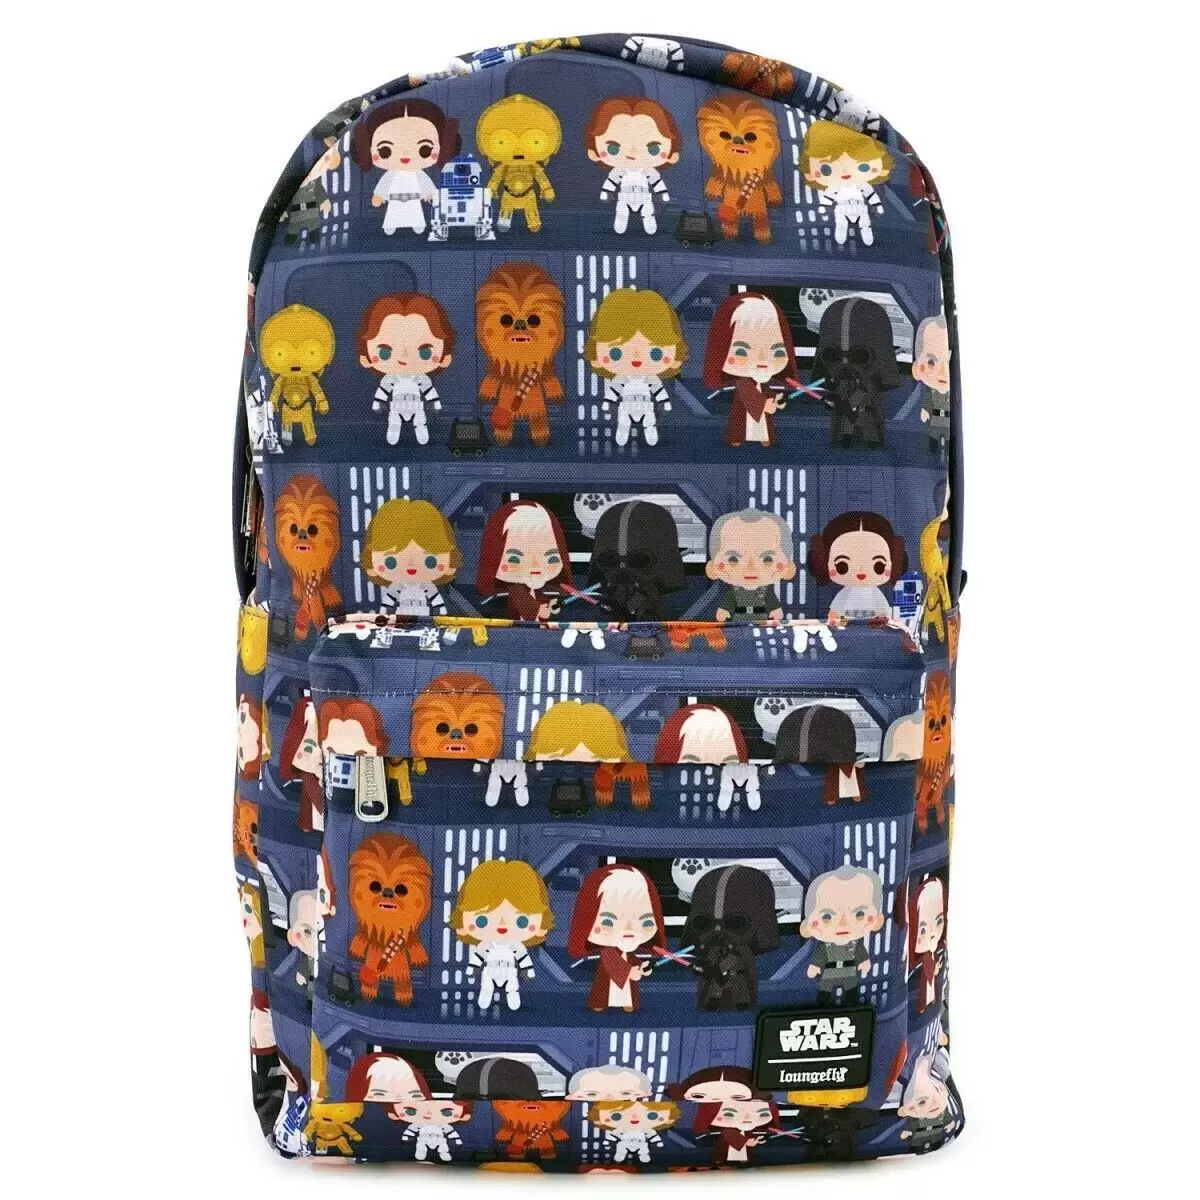 Loungefly - Sac a dos  - Star Wars - Printed Nylon Backpack